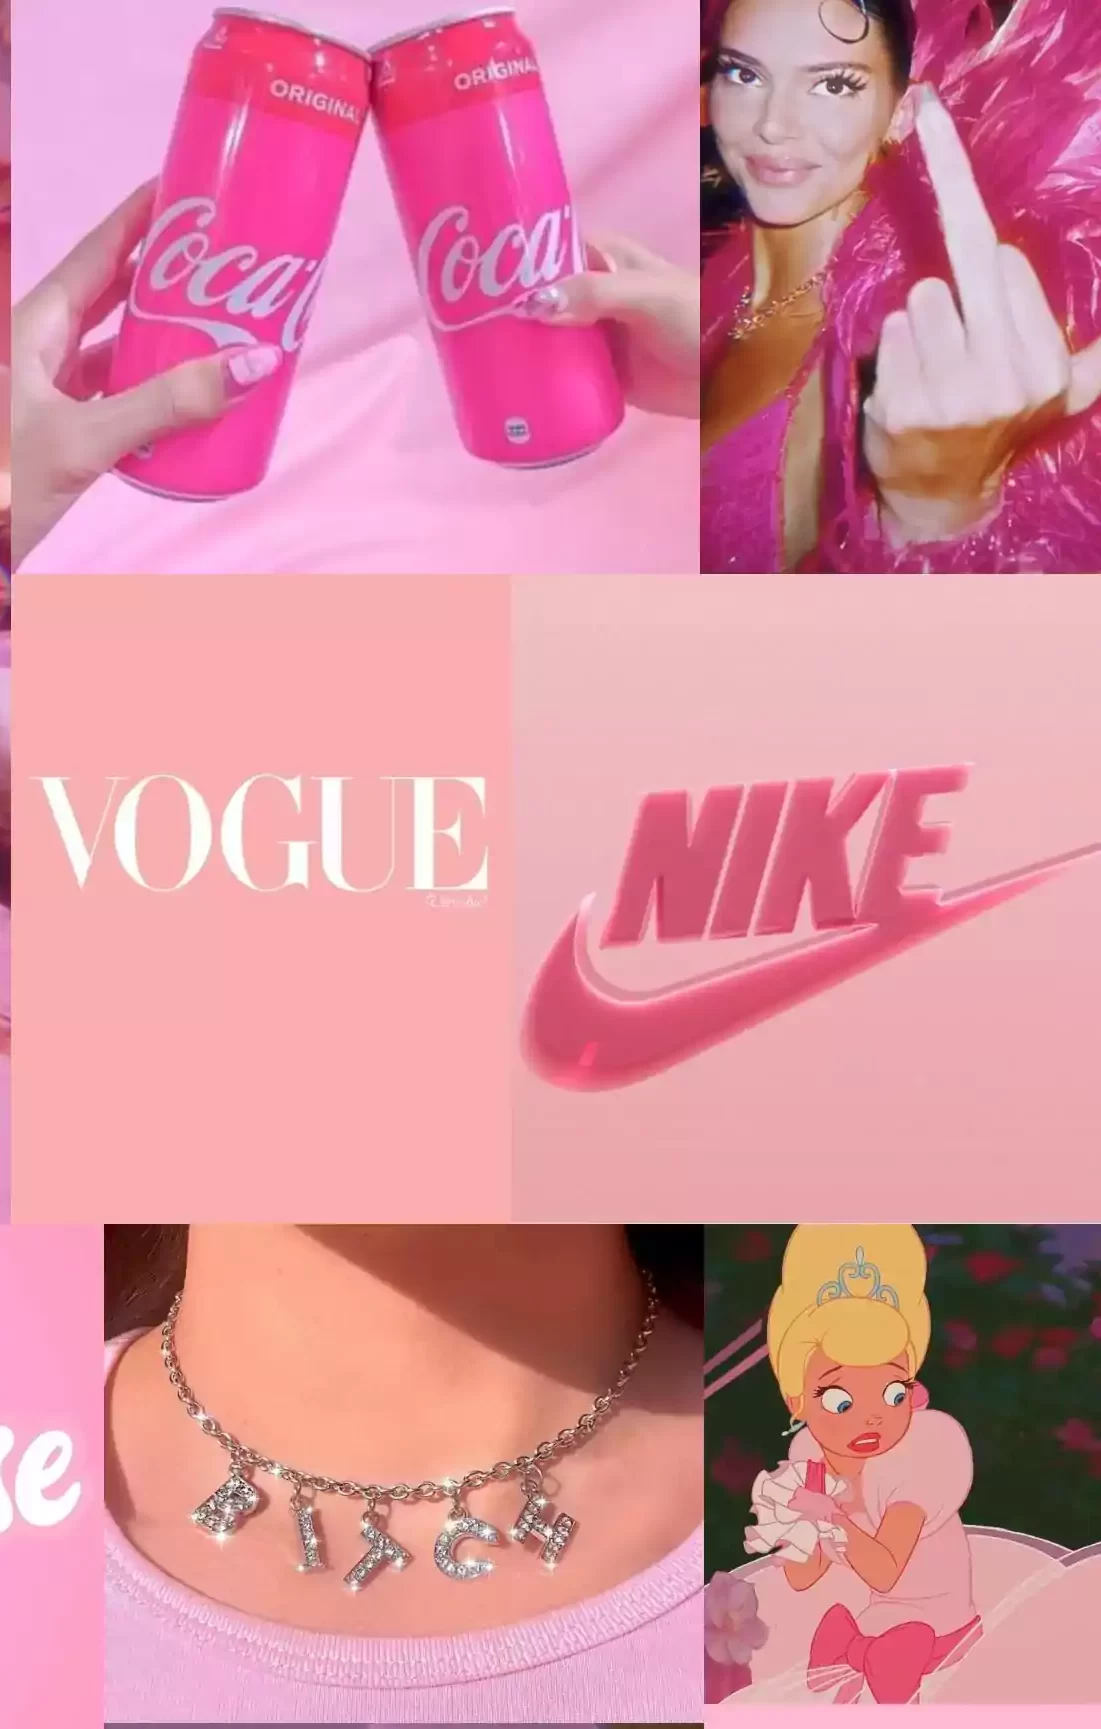 Aesthetic wallpaper for phone with baddie girl, pink background, and Nike logo. - Nike, baddie, Vogue